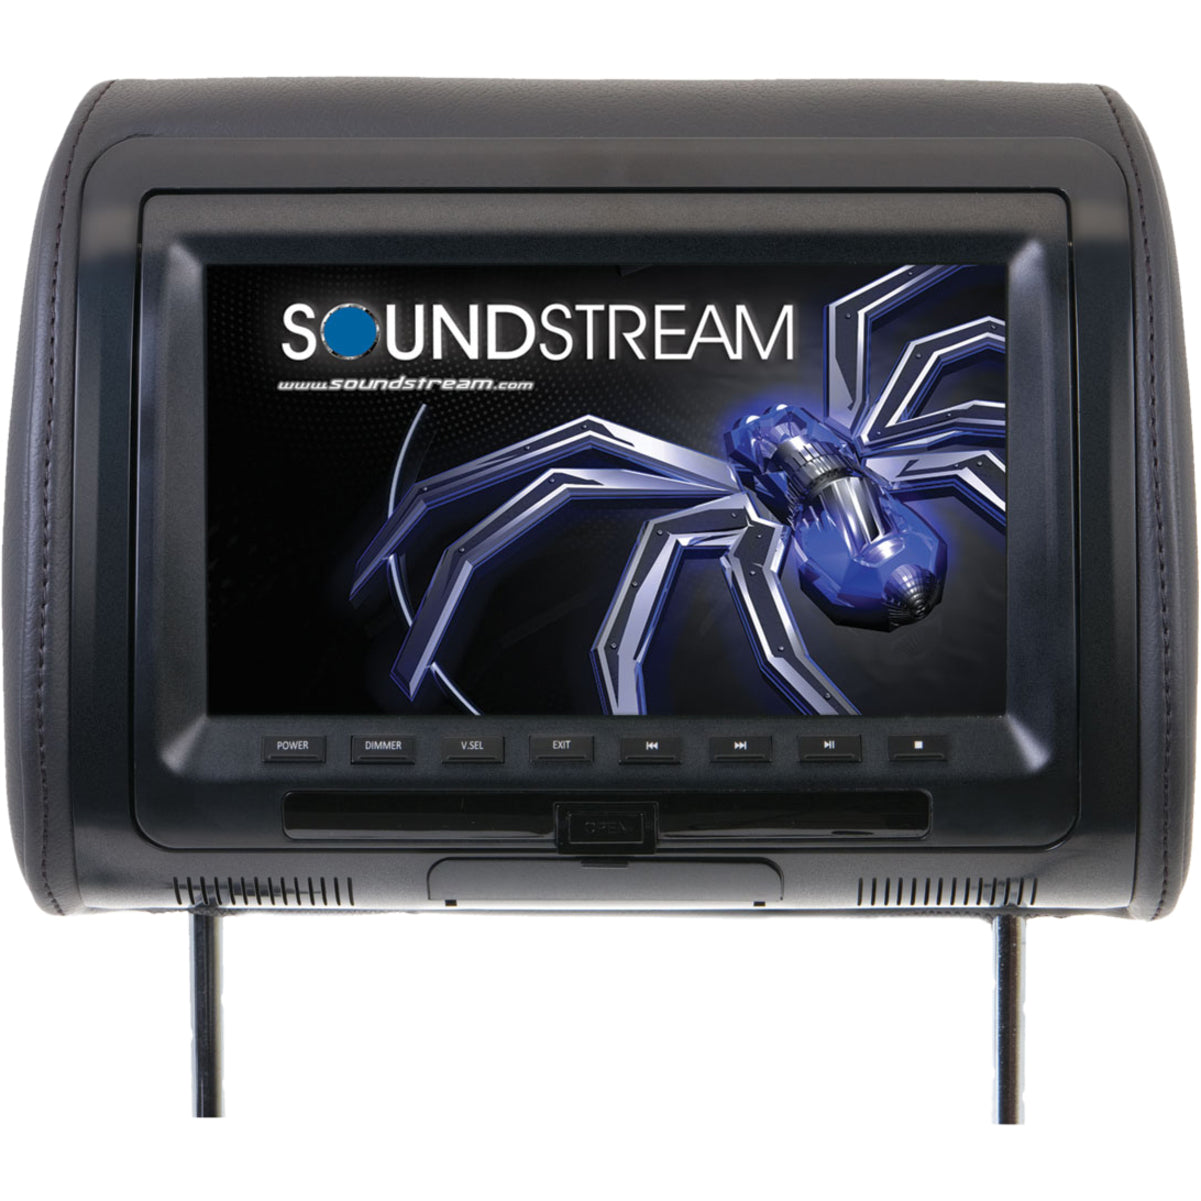 Soundstream VHD-90CC Car DVD Player - 9" LCD - Single DIN [Discontinued]